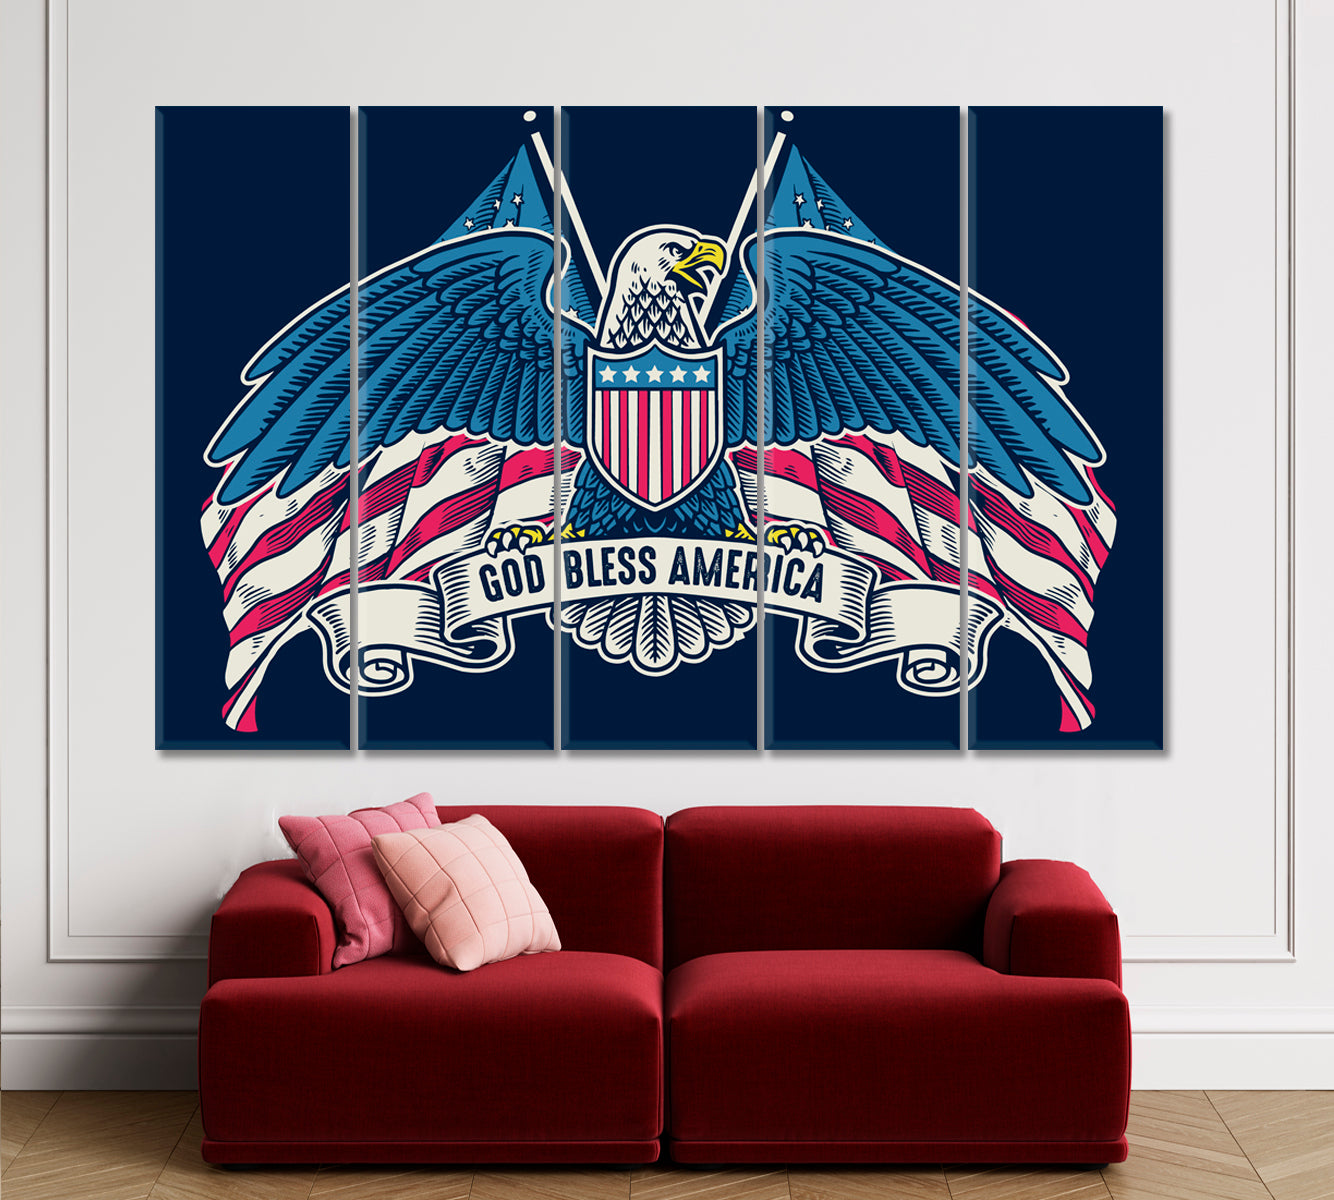 GOD BLESS AMERICA Eagle Wings American Flag Vintage Style Poster Posters, Flags Giclee Print Artesty 5 panels 36" x 24" 